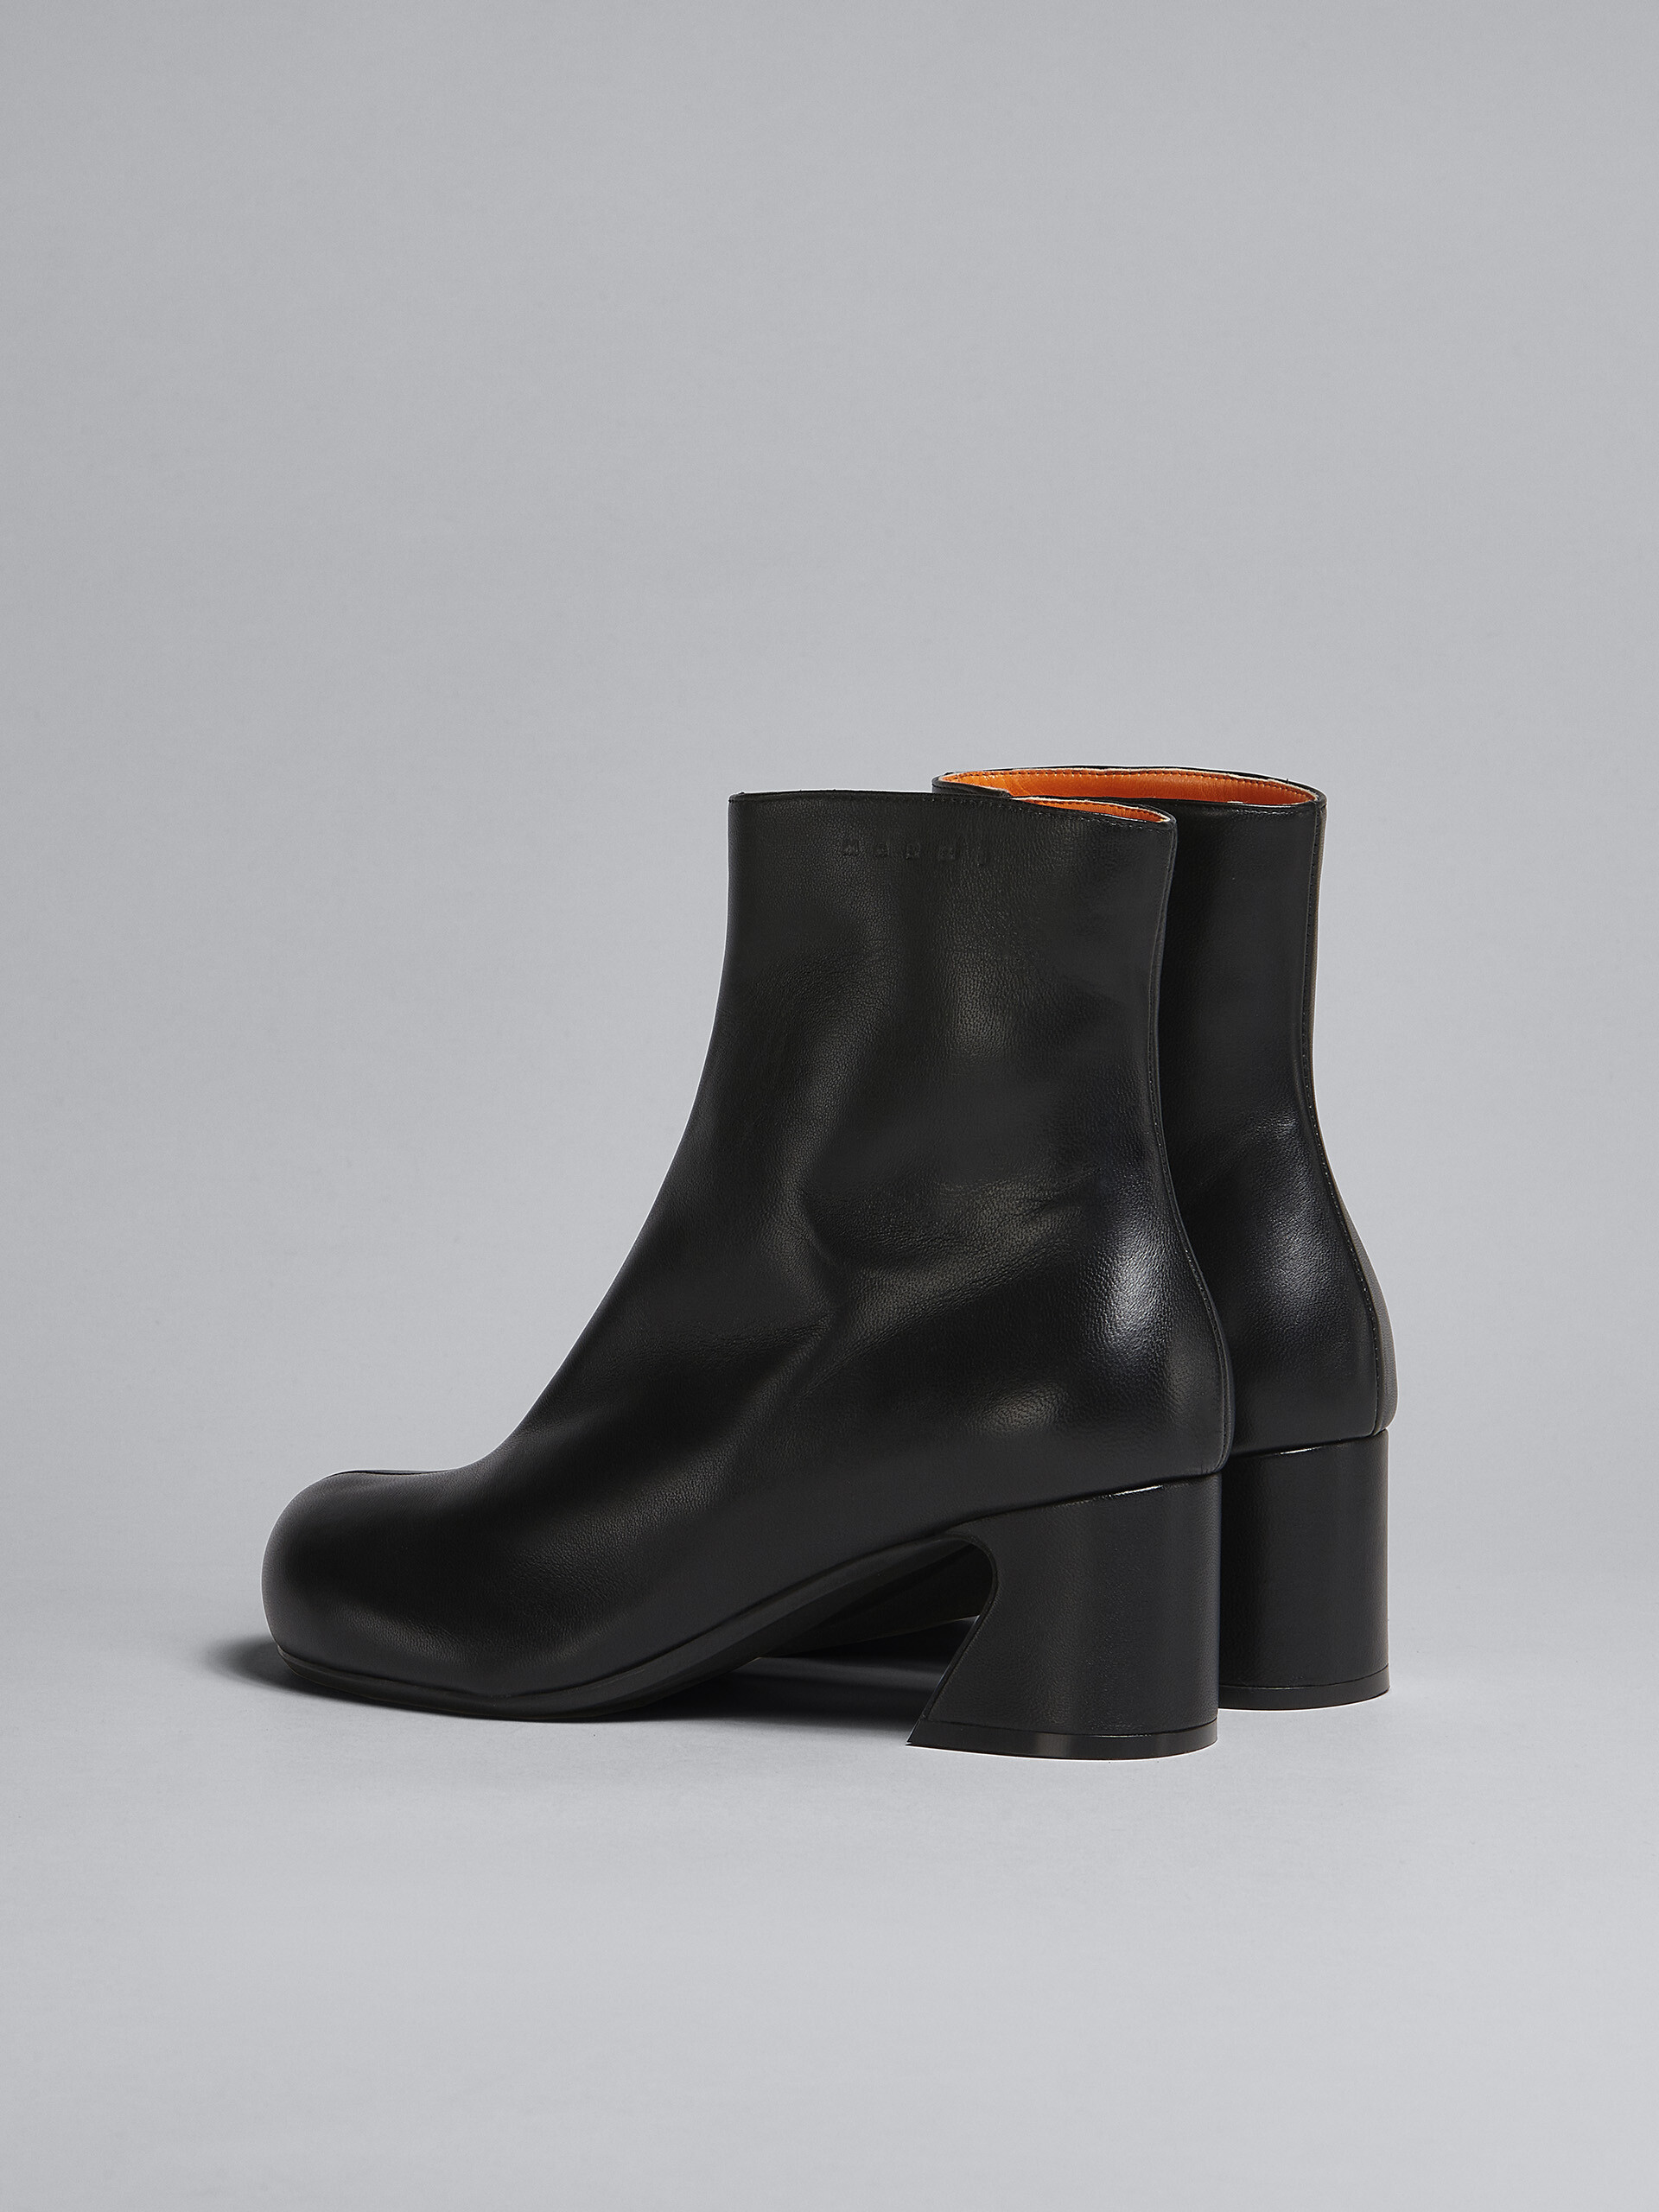 Black leather ankle boot - Boots - Image 3